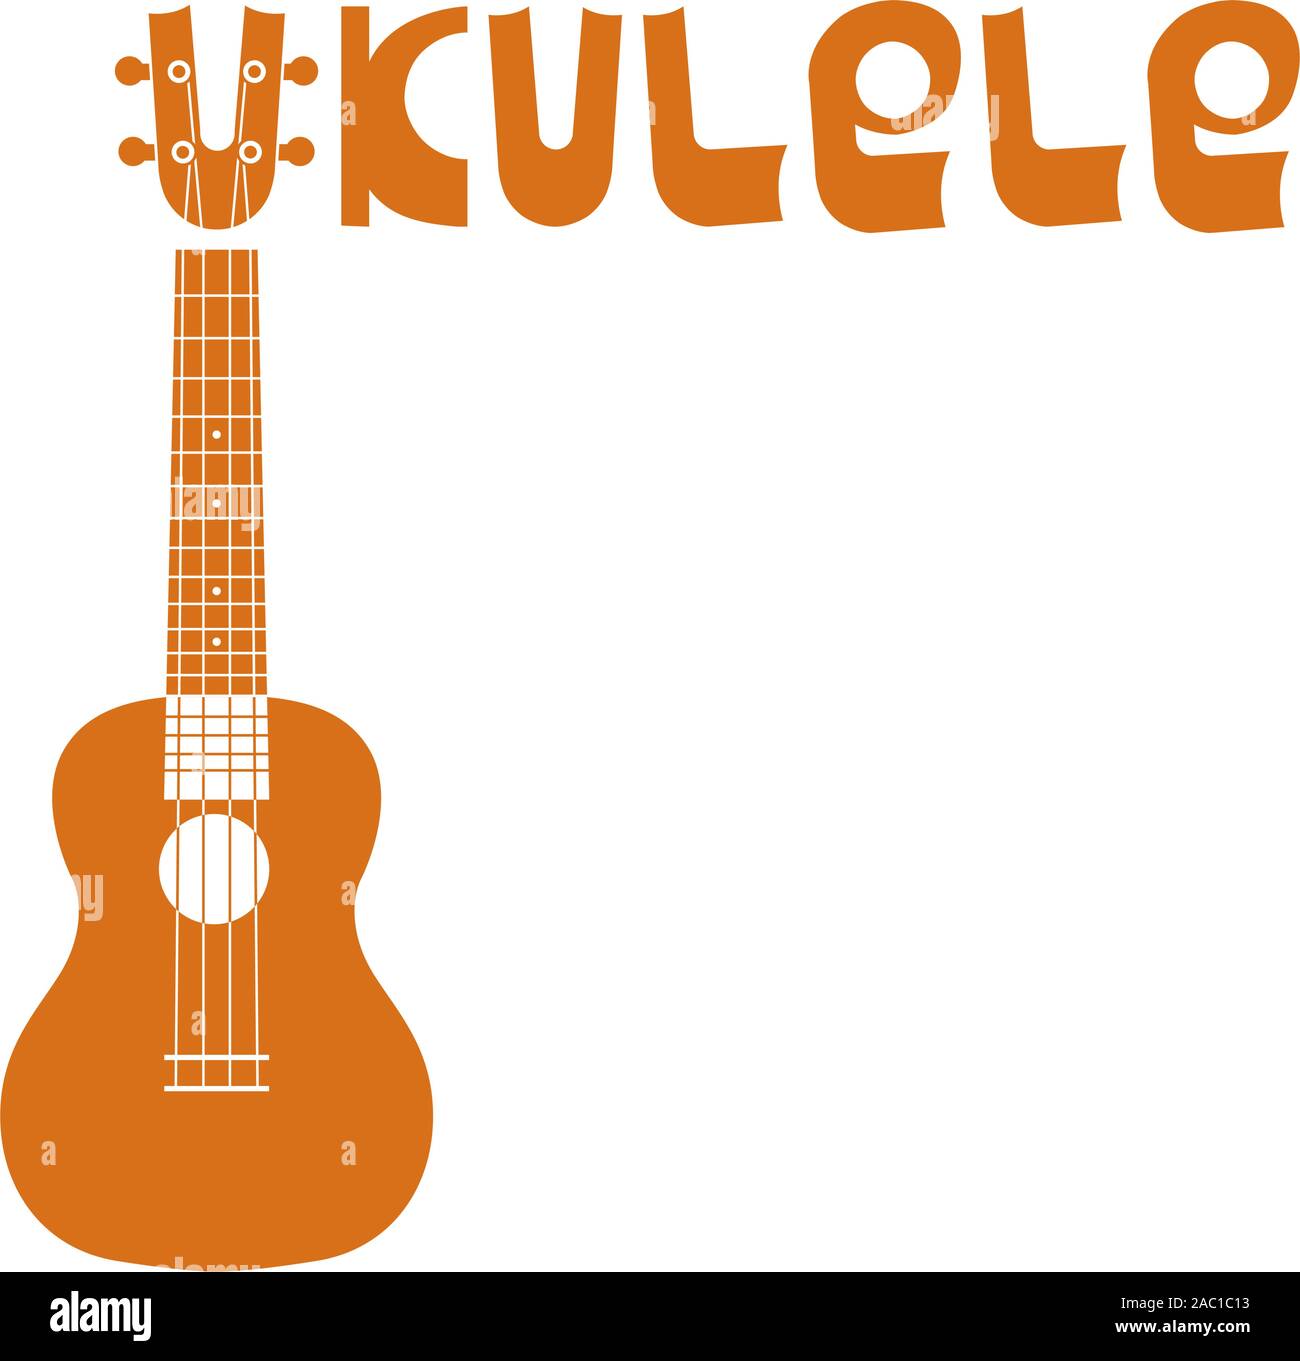 Ukulele Hawaiian guitar. Lettering of the word ukulele. String musical instrument. Simple brown vector illustration. Logo, badge, icon Stock Vector